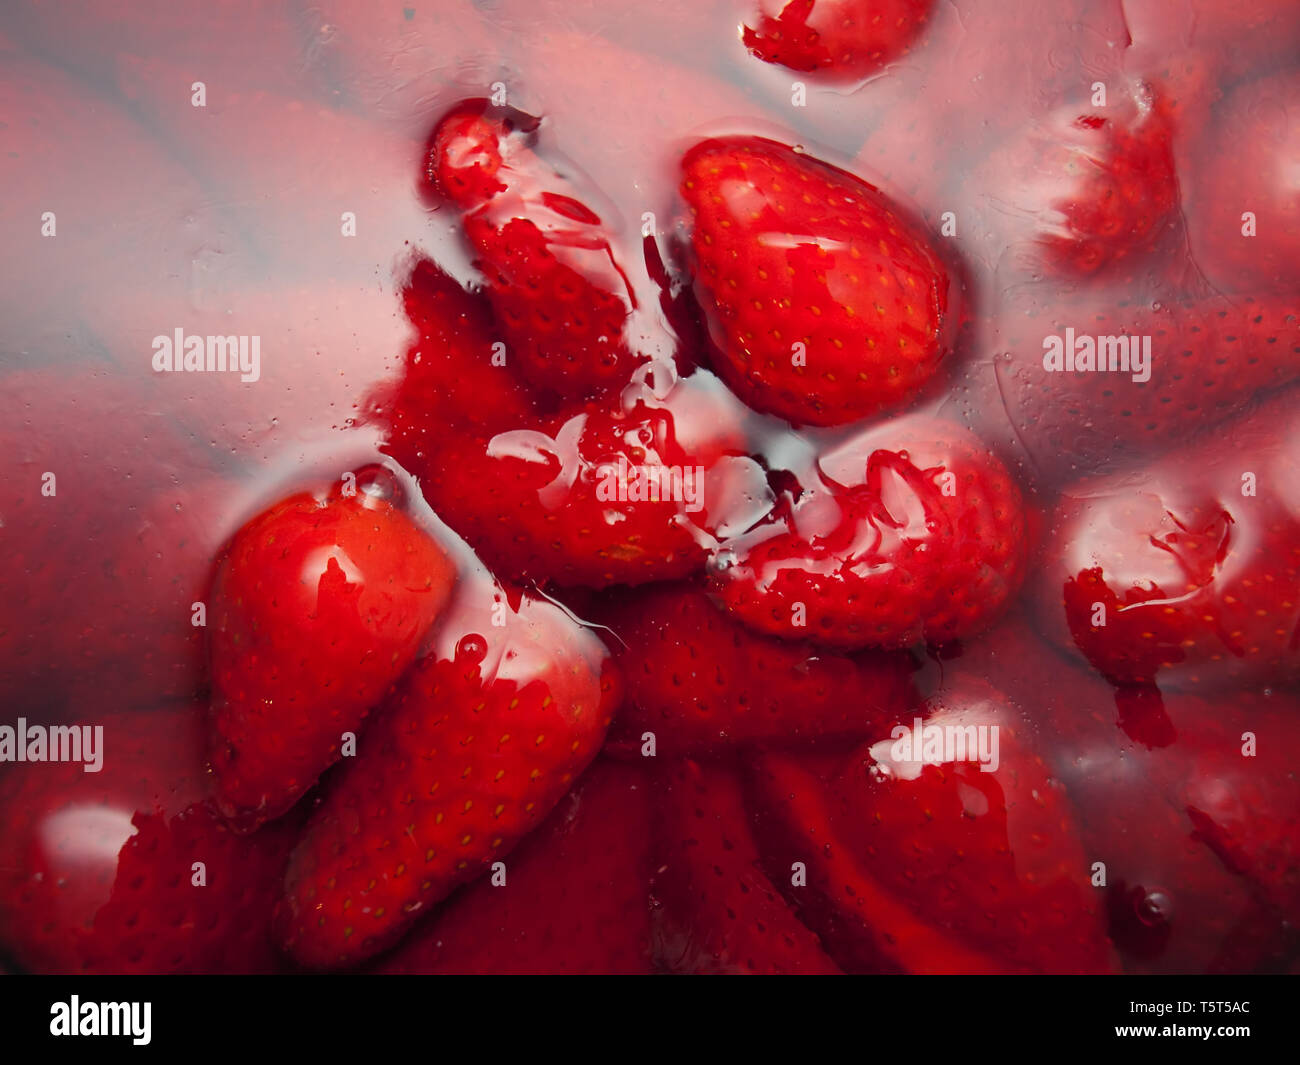 Ripe strawberries covered with jelly. Stock Photo